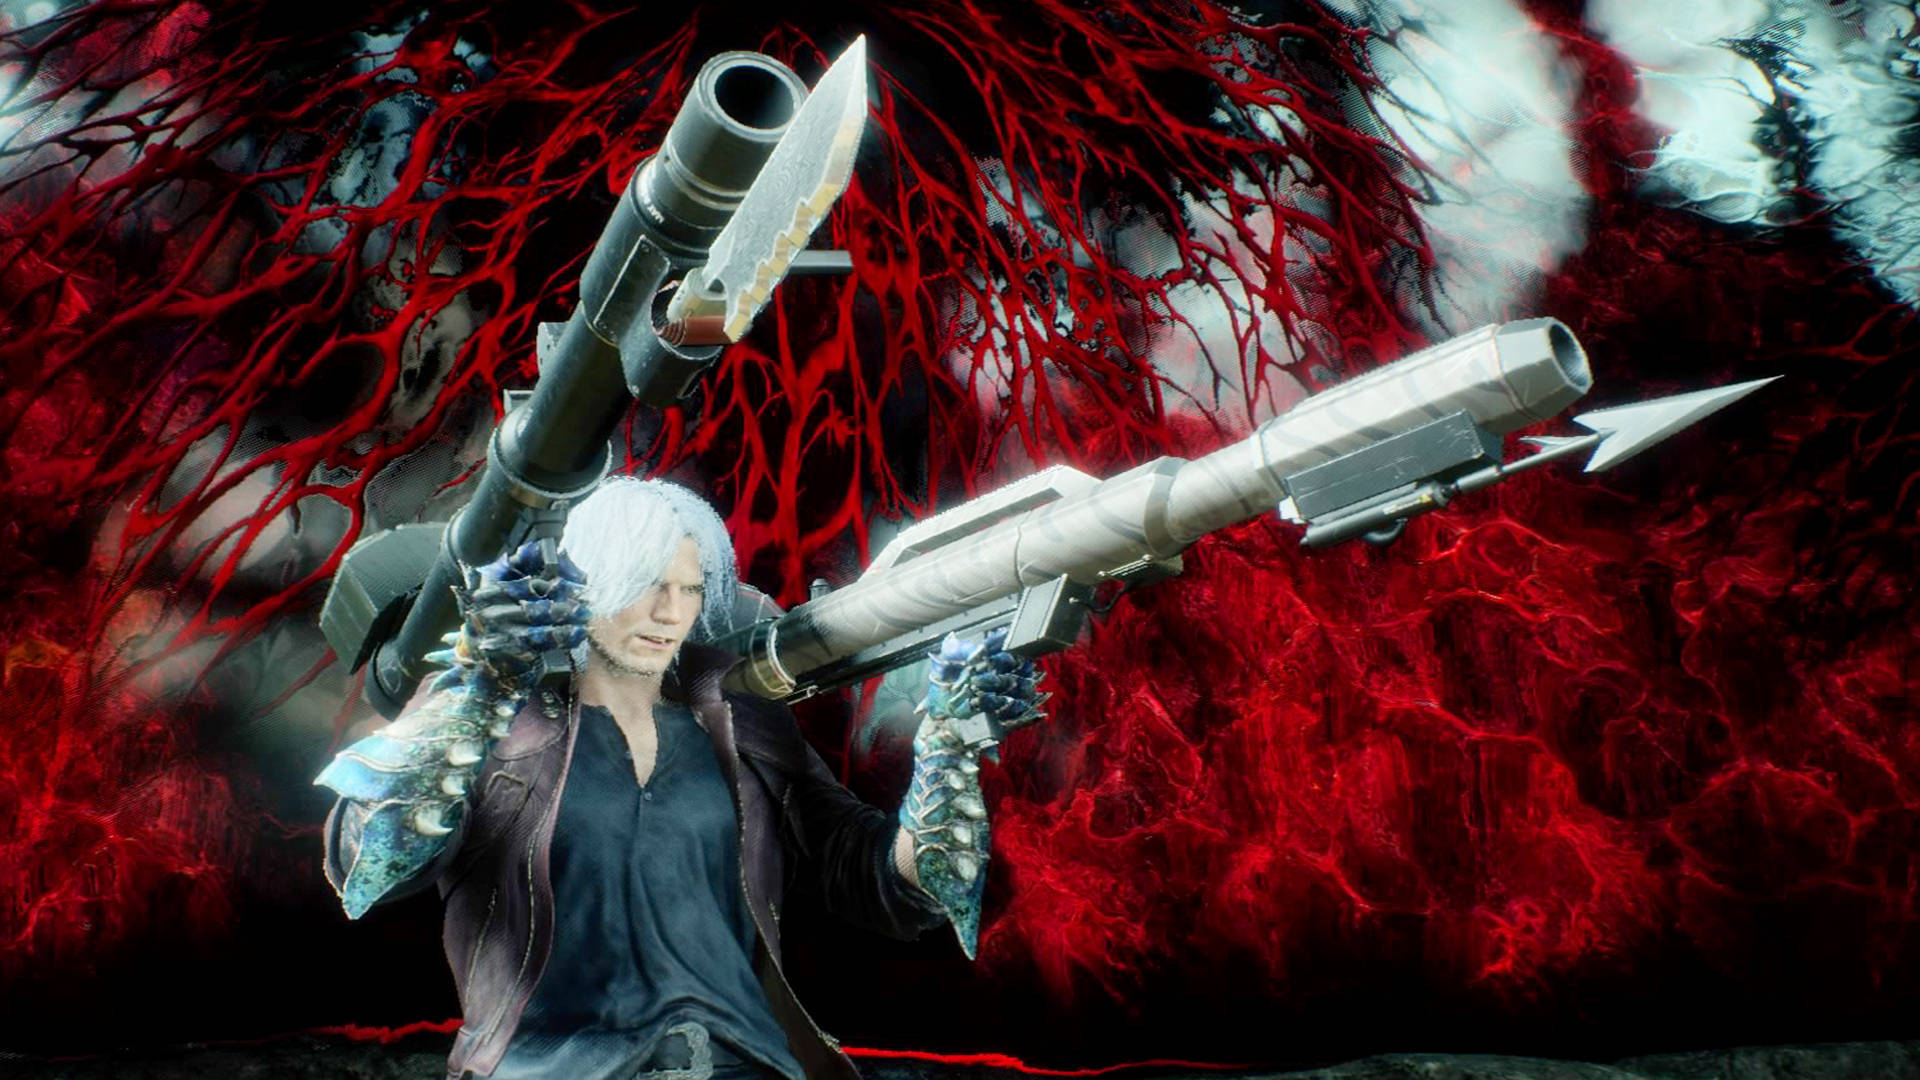 Devil May Cry 5 Deluxe Edition + 19 DLCs Repack